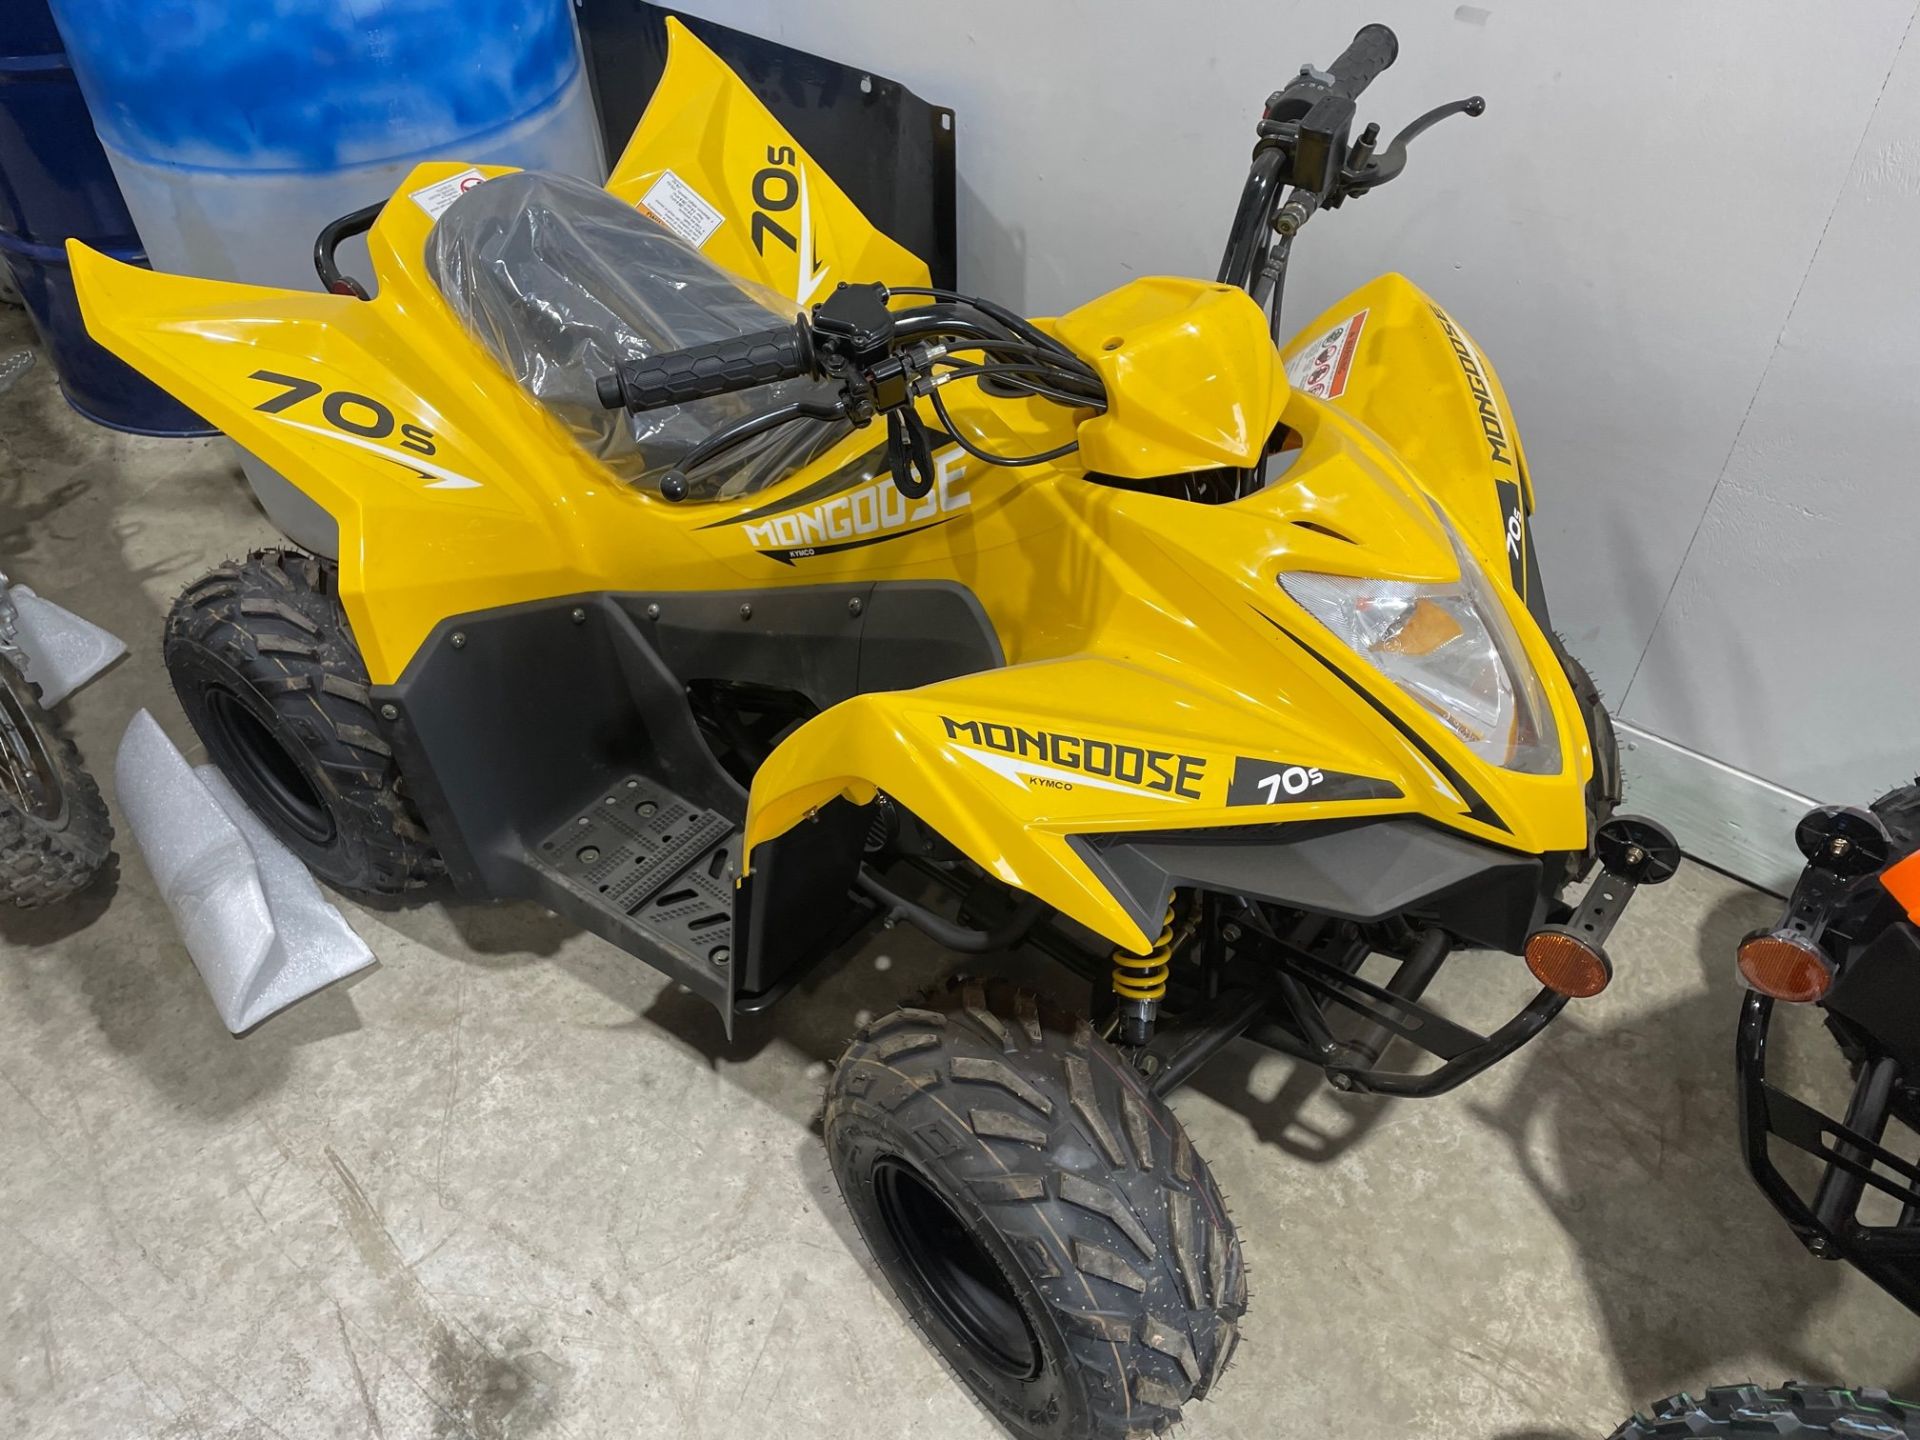 2021 Kymco Mongoose 70S in South Wales, New York - Photo 1